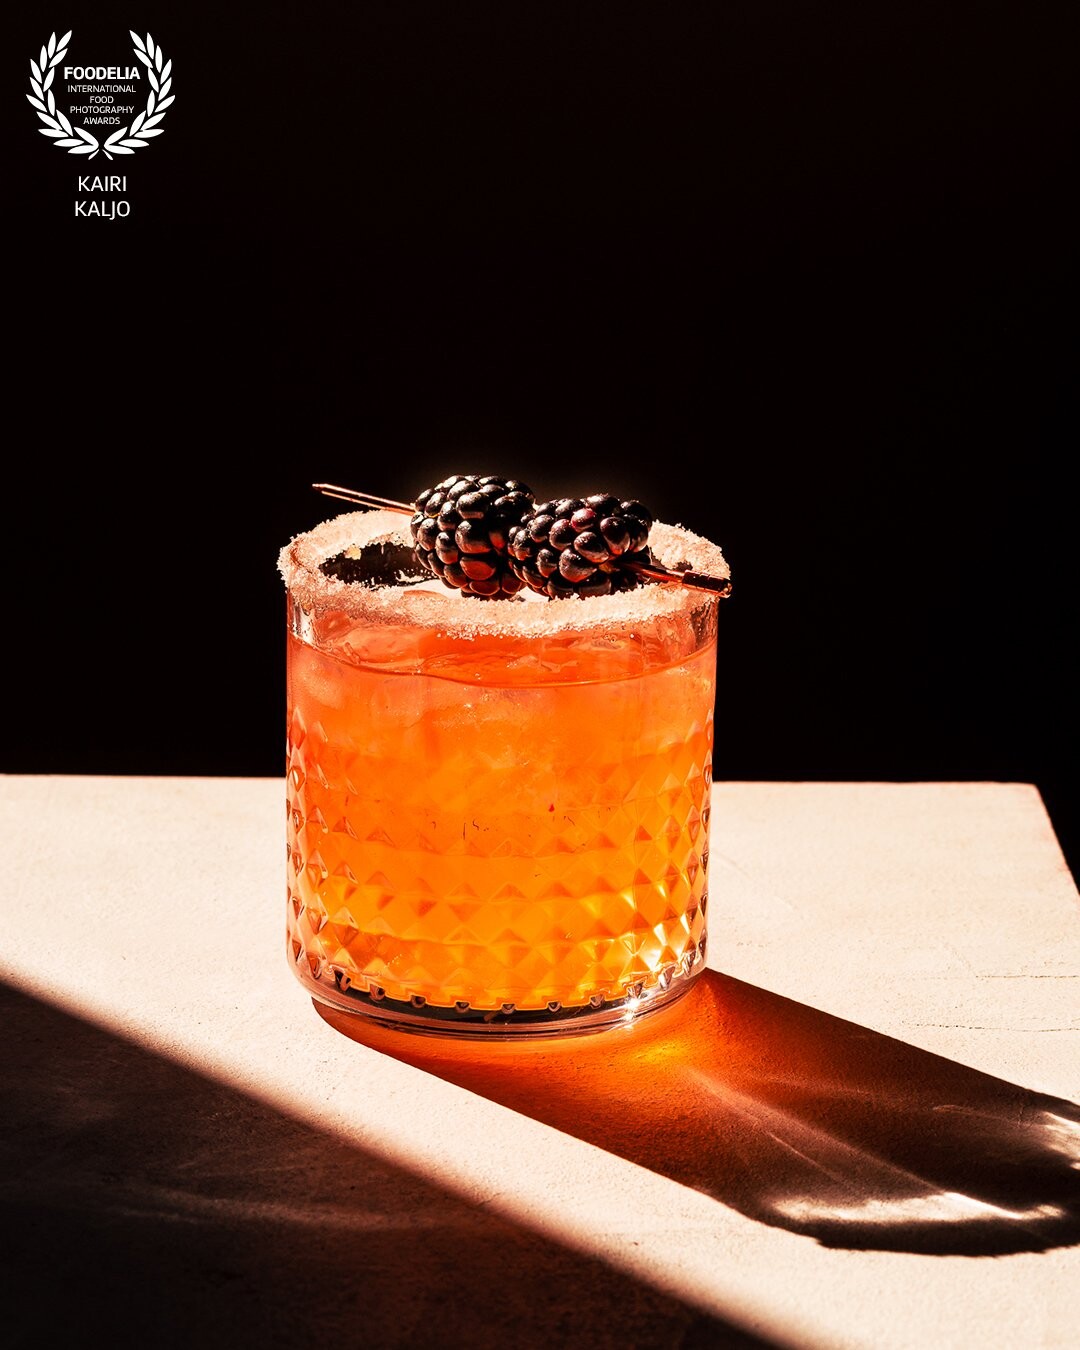 This is a cocktail shot in a magical morning sun. Whilst shot with the direct backlight, the rest has automatically blackened out. One of those impromptu shots with no styling apart from pouring something into the glass and garnishing with some blackberries and placing it into the direct sun light.